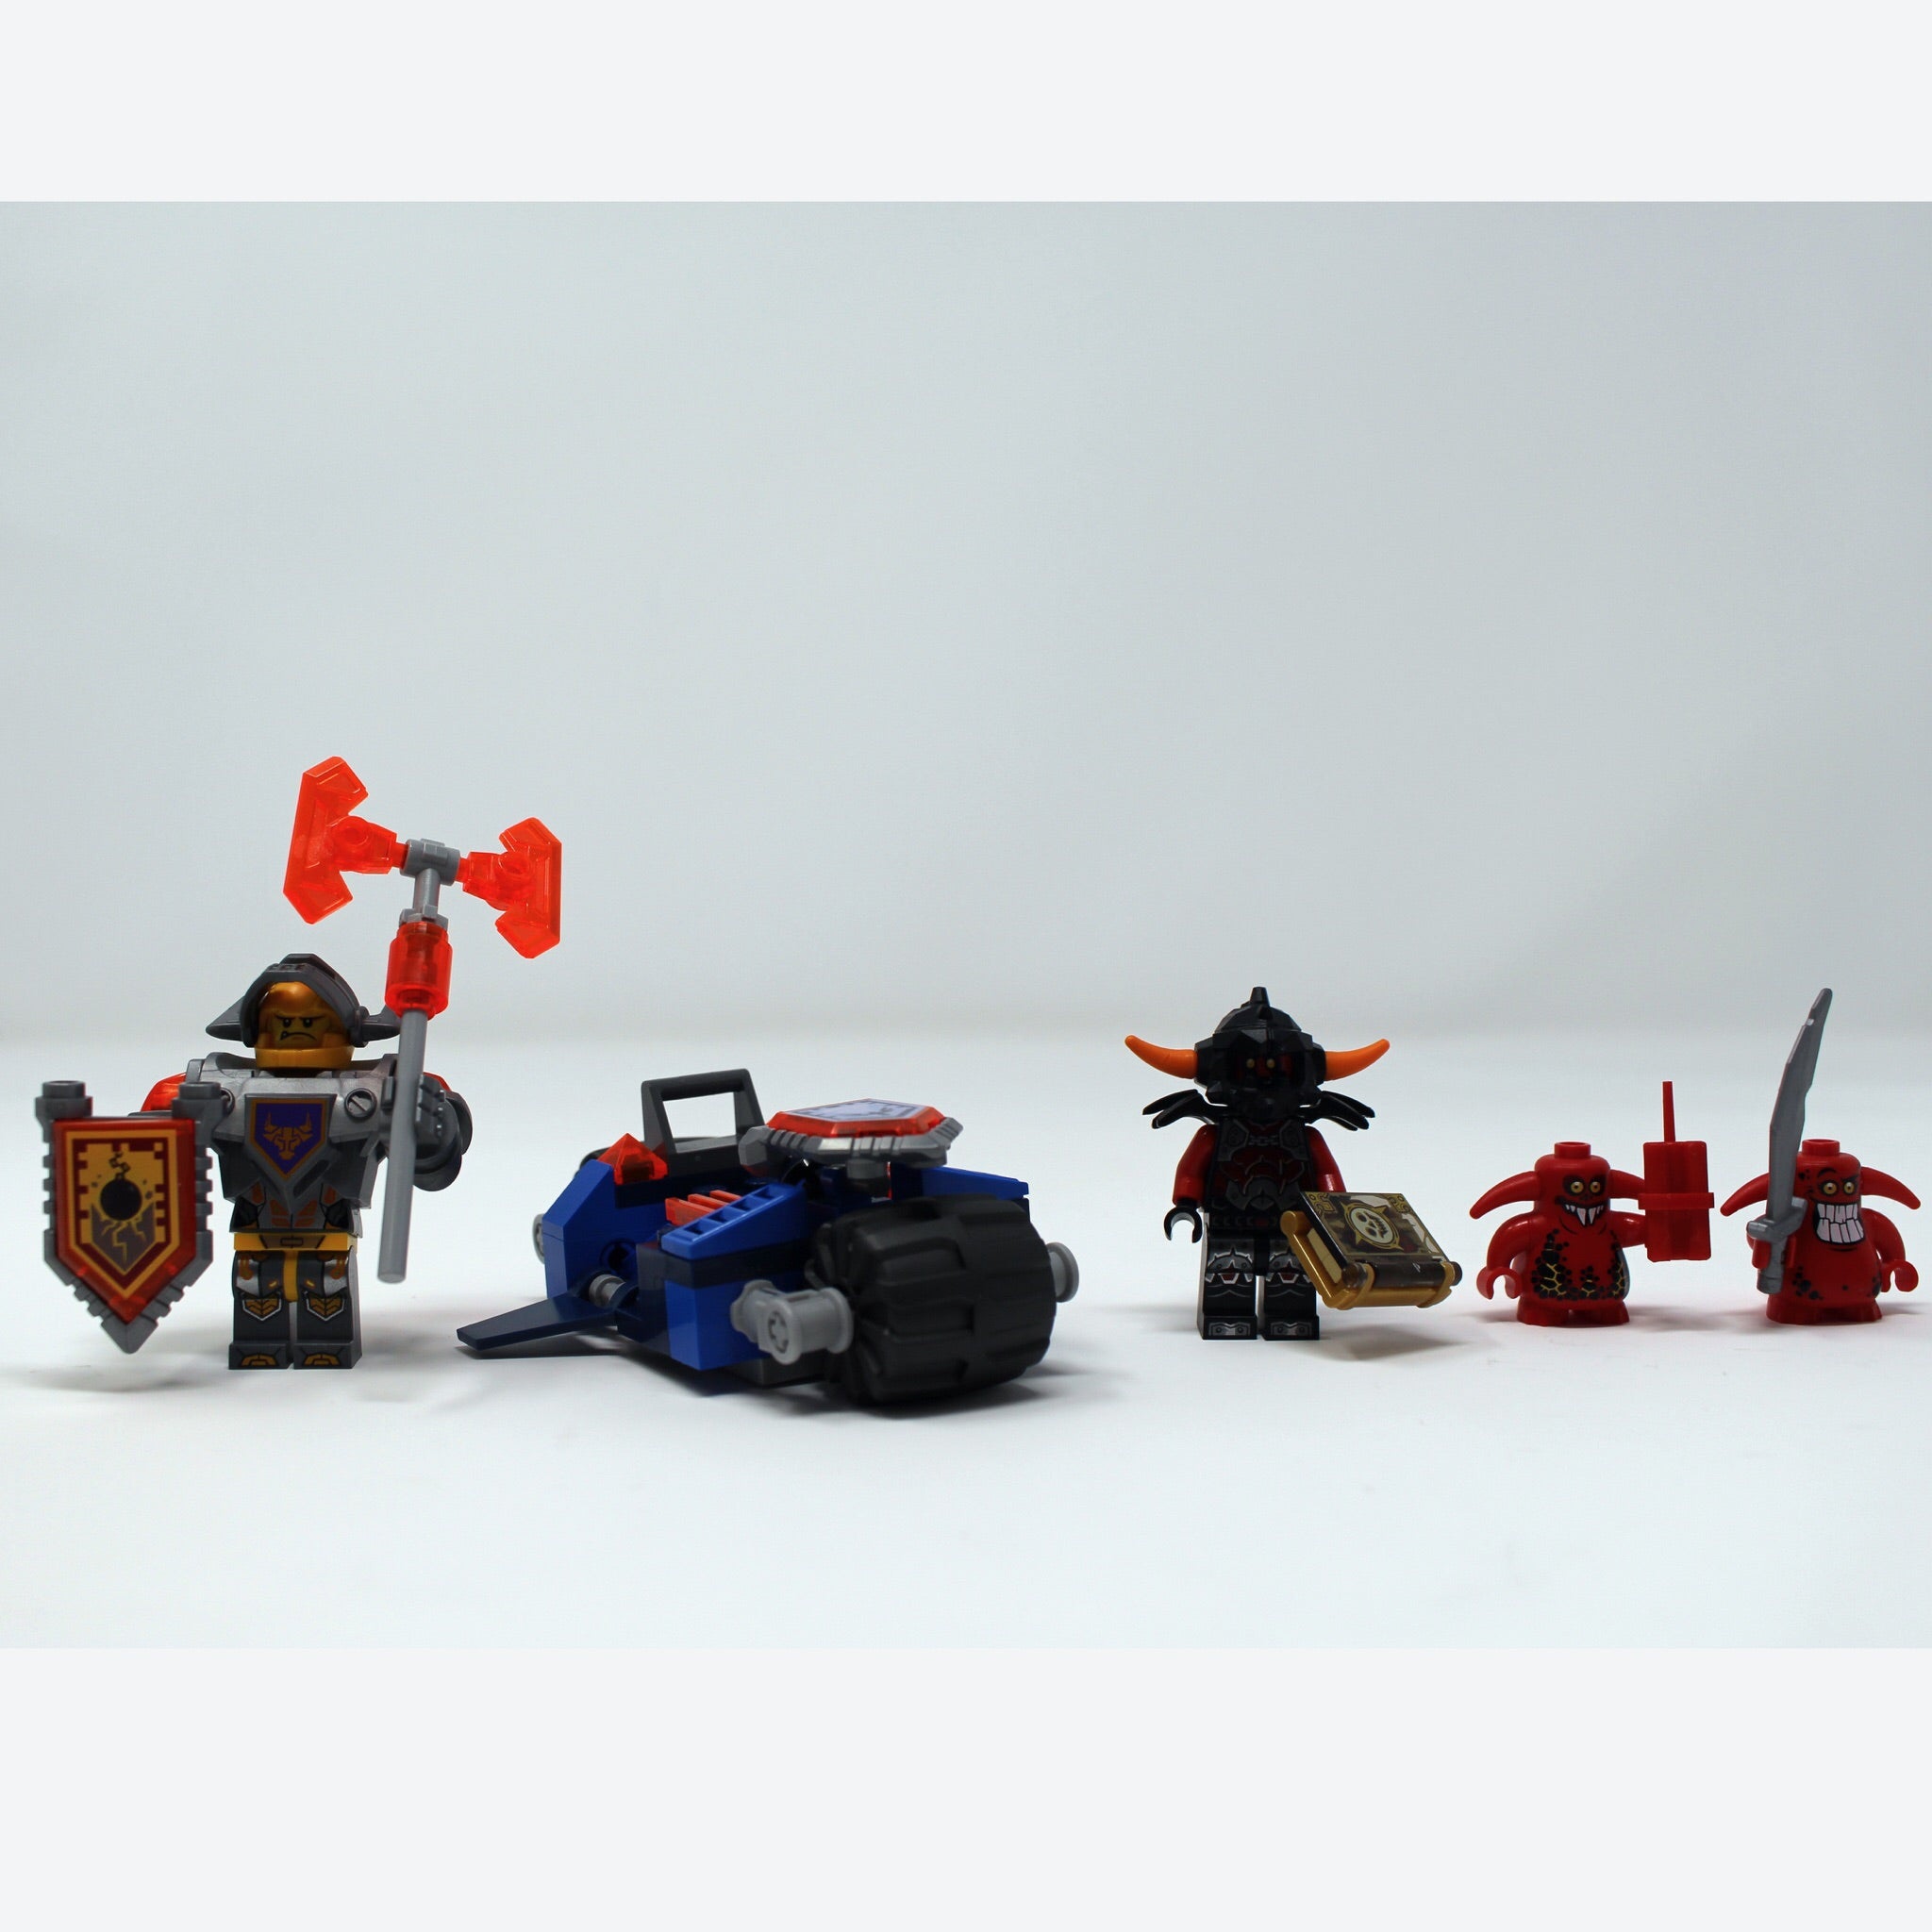 Used Set 70317 Nexo Knights The Fortrex